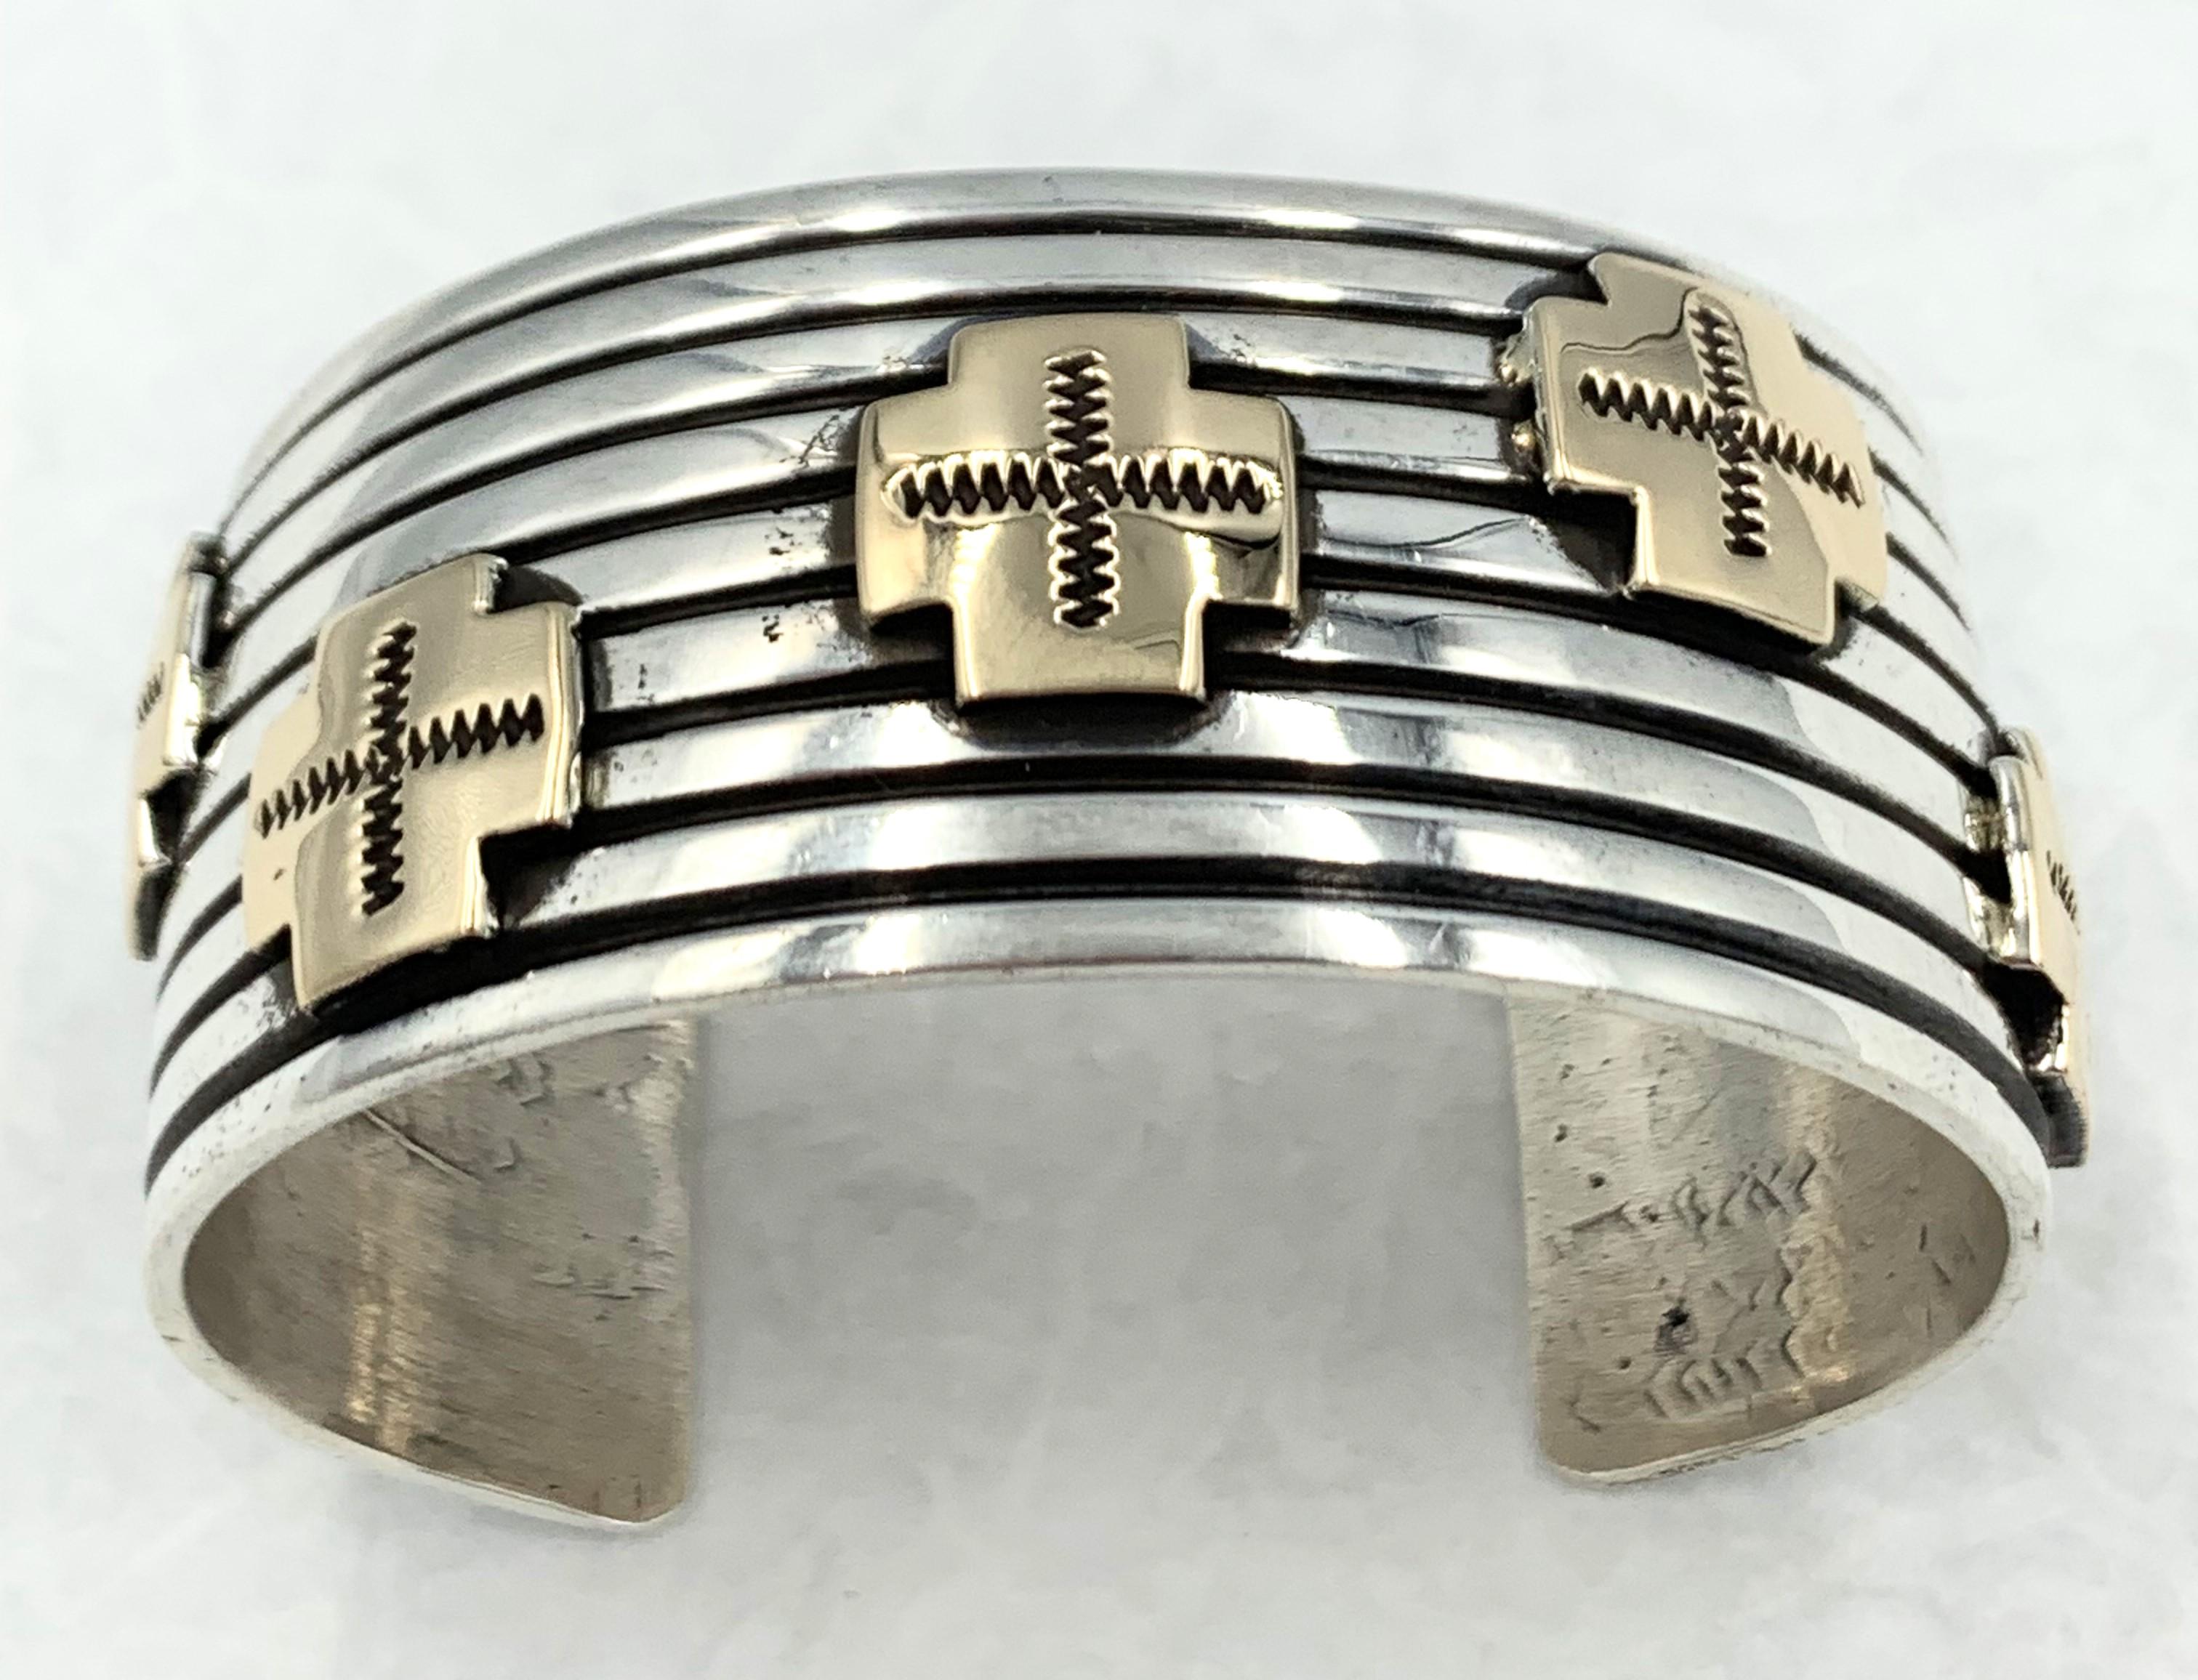 Dramatic, deeply grooved and ribbed cuff bracelet by Navajo silversmith Albert Jake. This smooth rounded 1 1/2” sterling silver bracelet has been deeply stamped with eight horizontal grooved bands showcasing five 14k gold crosses. The deep stampwork